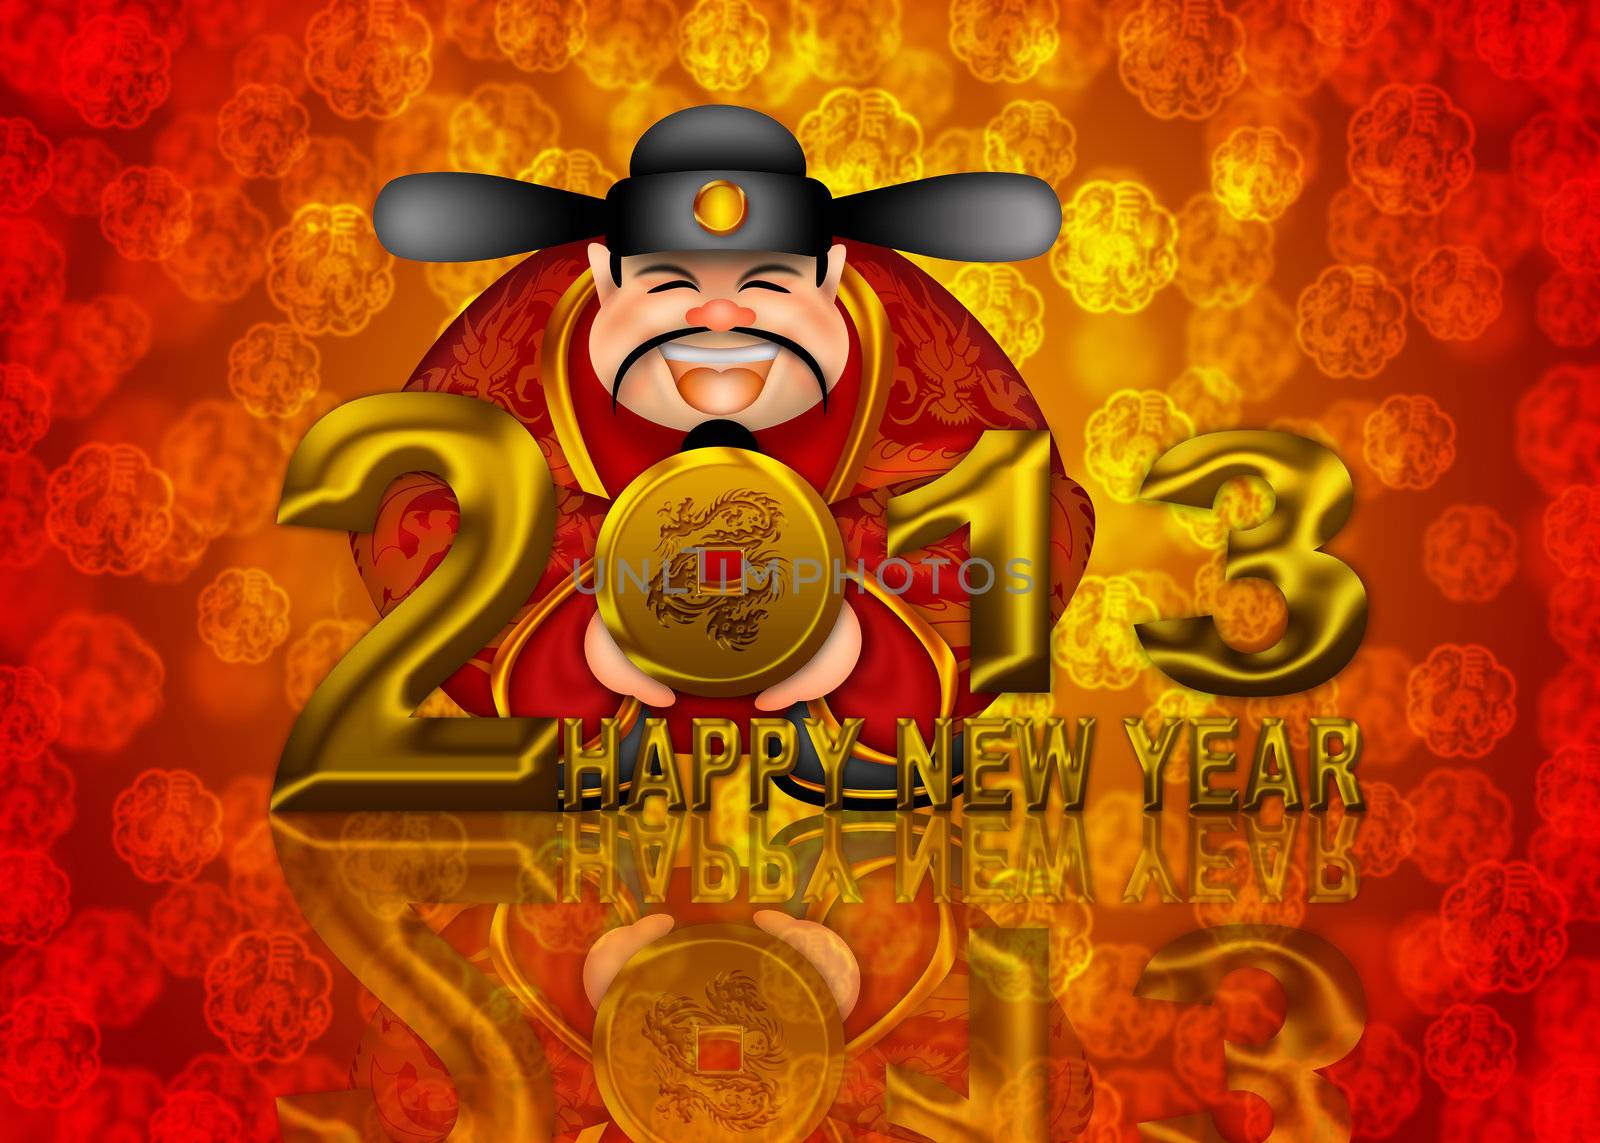 2013 Happy New Year Chinese Money God Illustration by jpldesigns